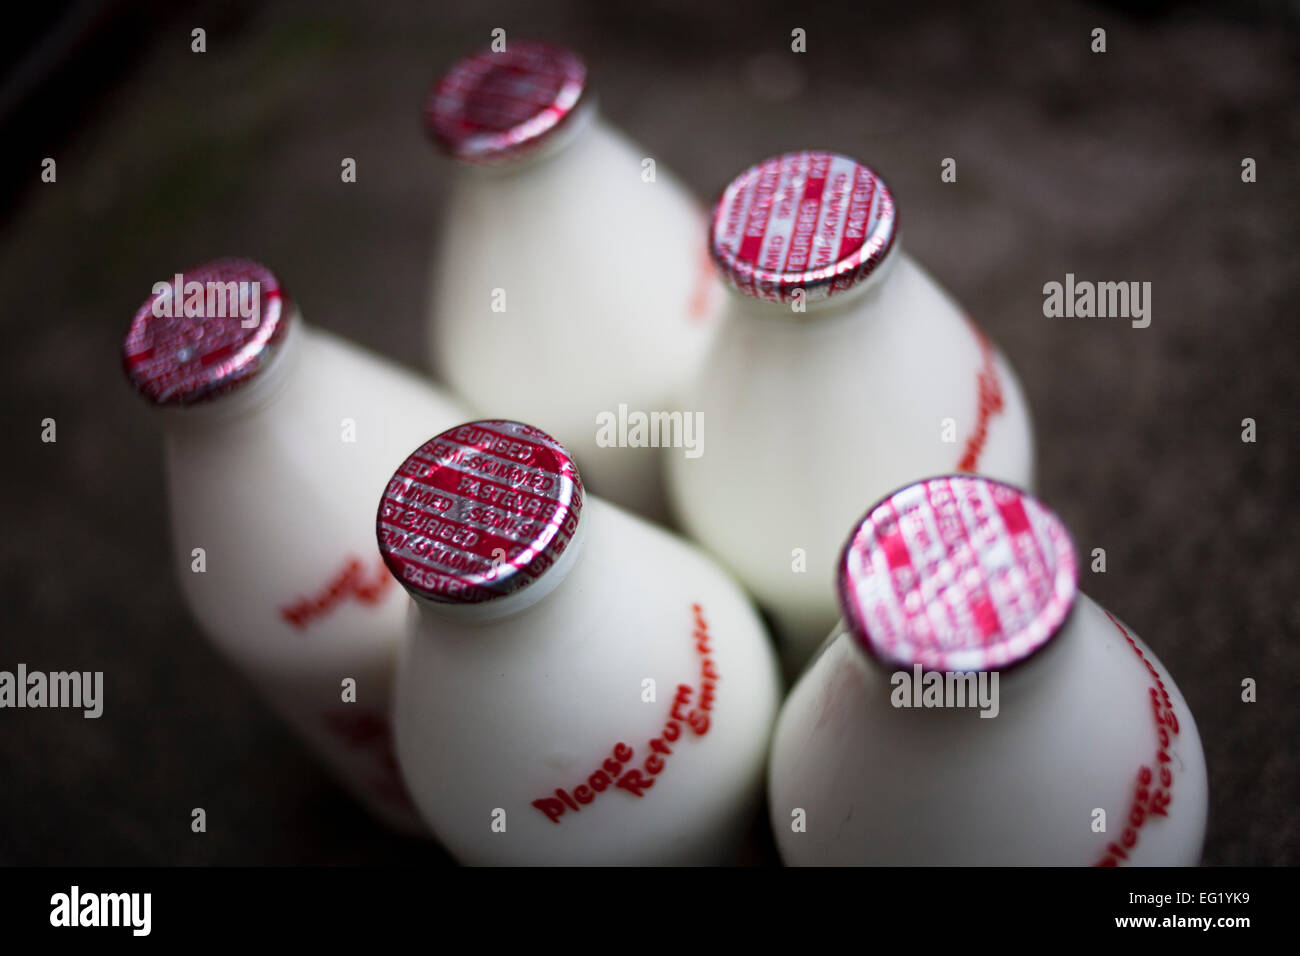 Milk bottles delivered to a household. Stock Photo